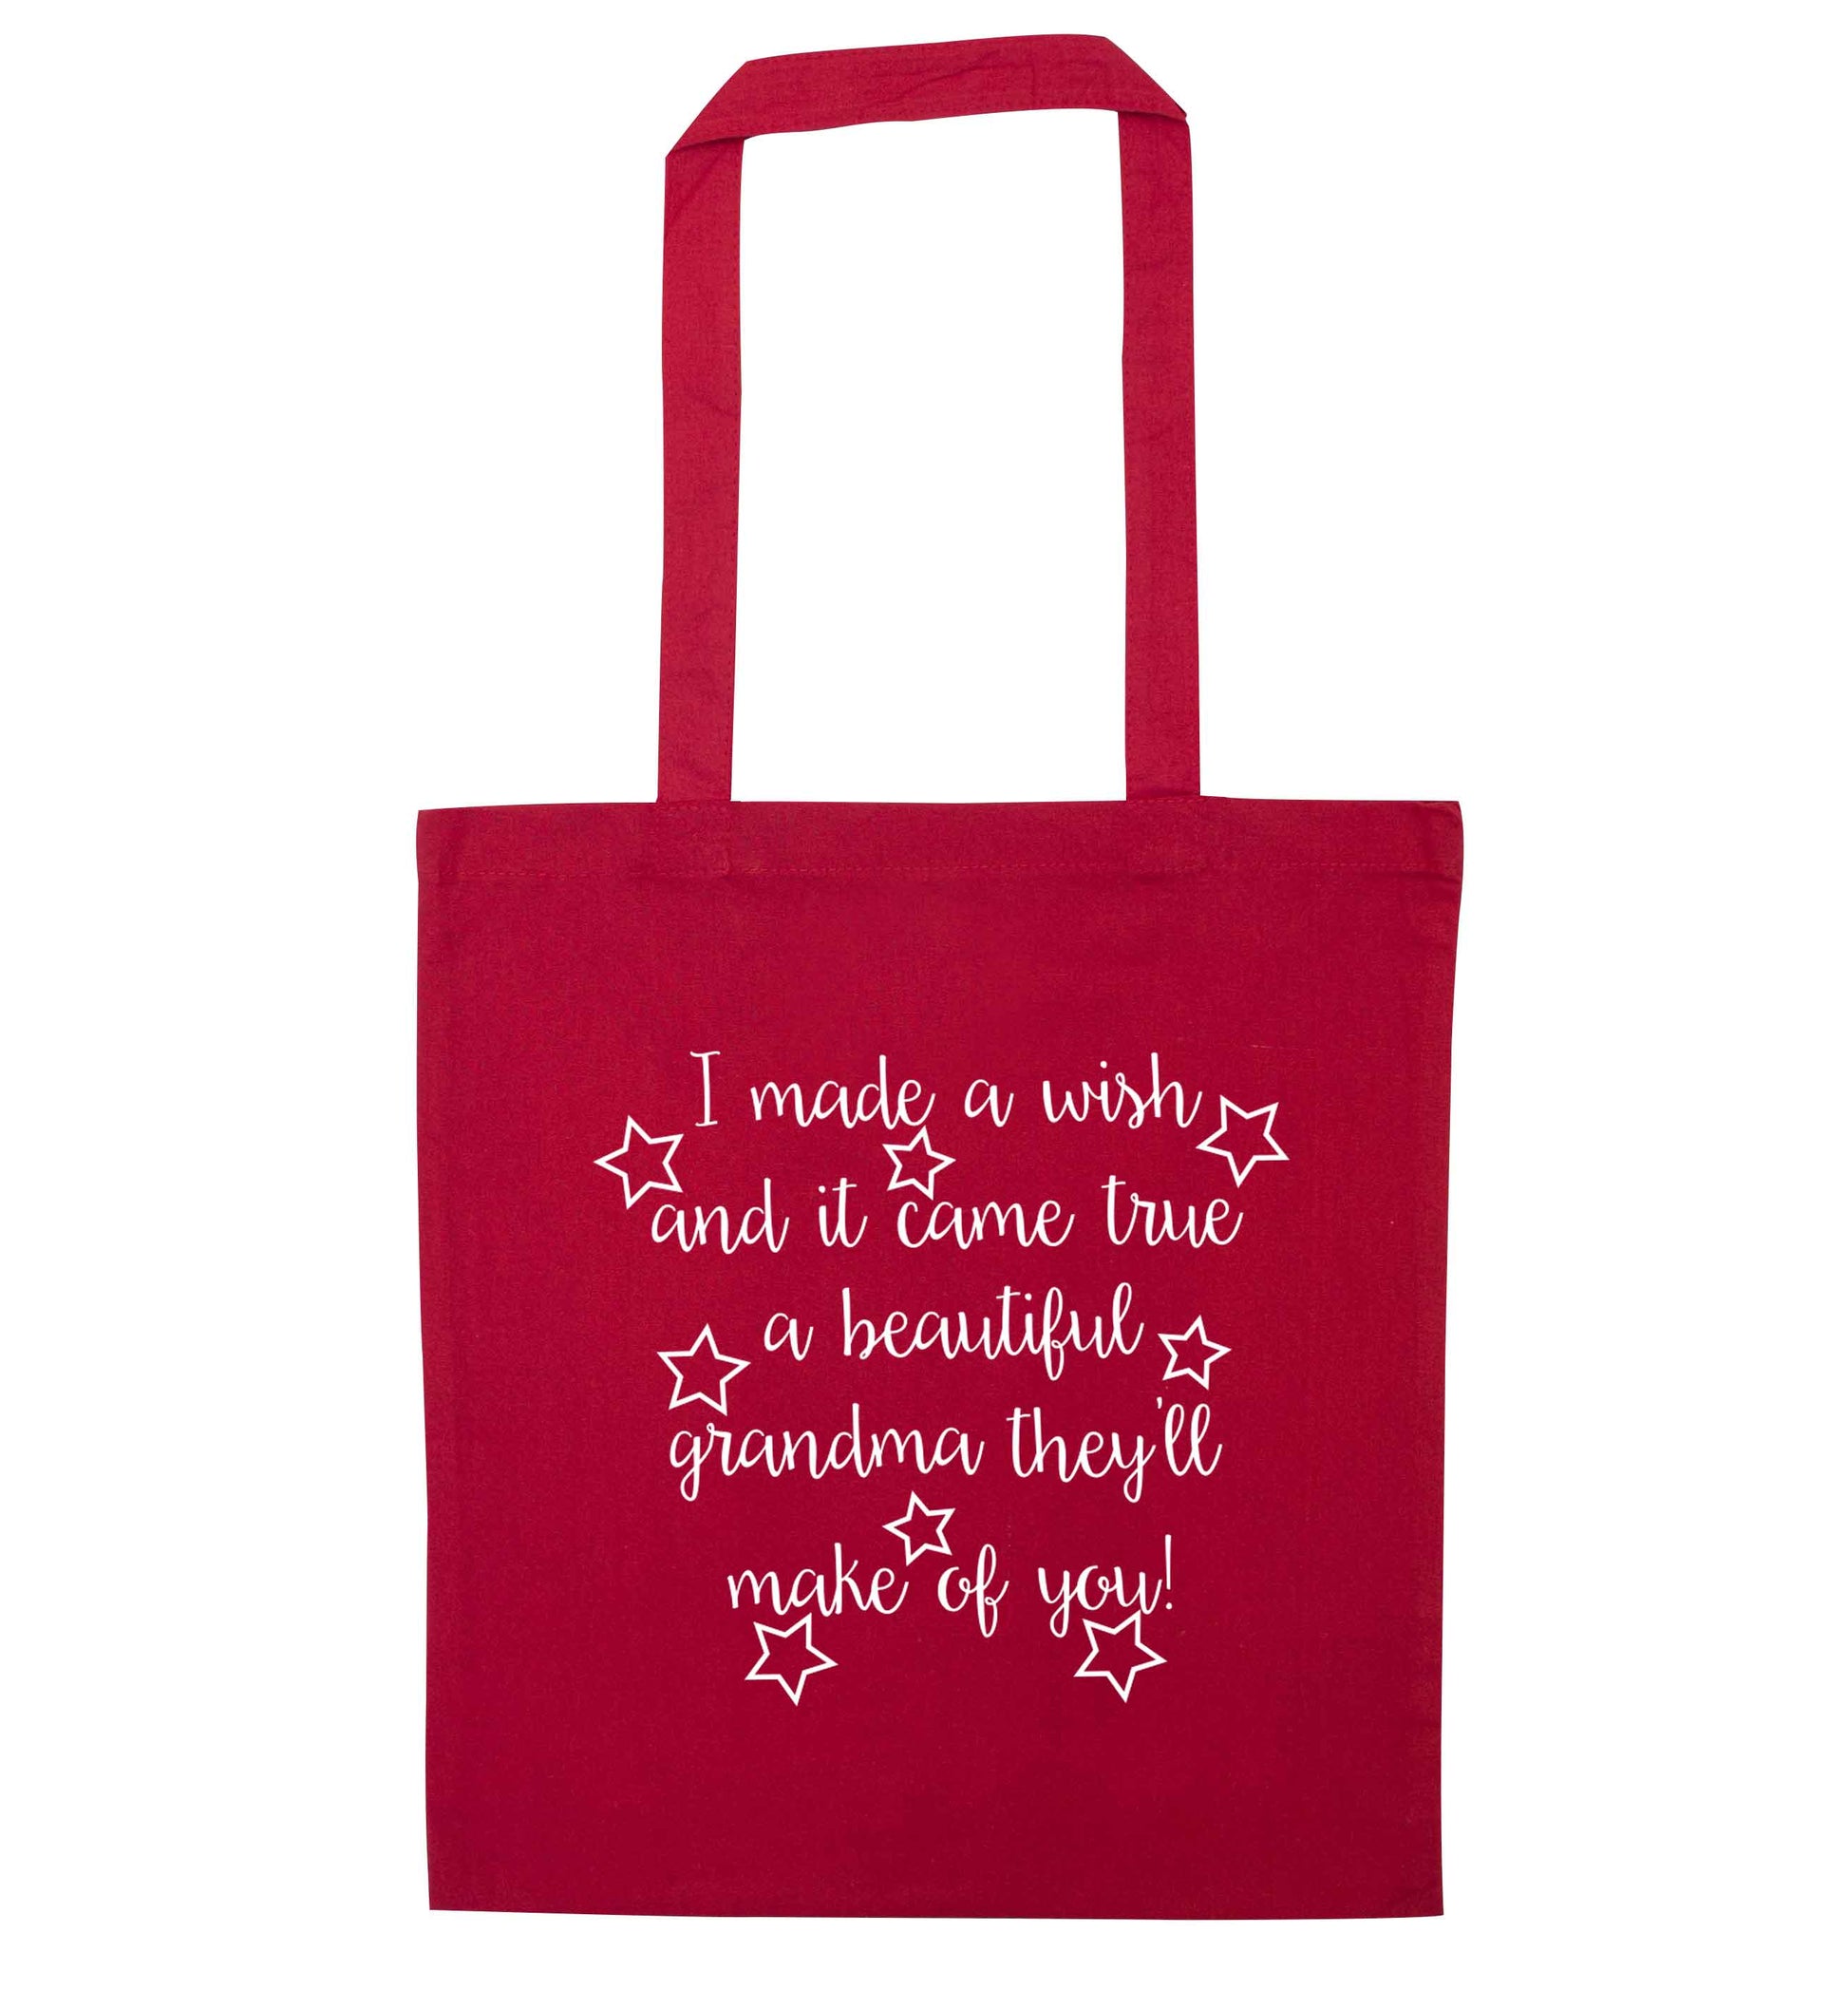 I made a wish and it came true a beautiful grandma they'll make of you! red tote bag